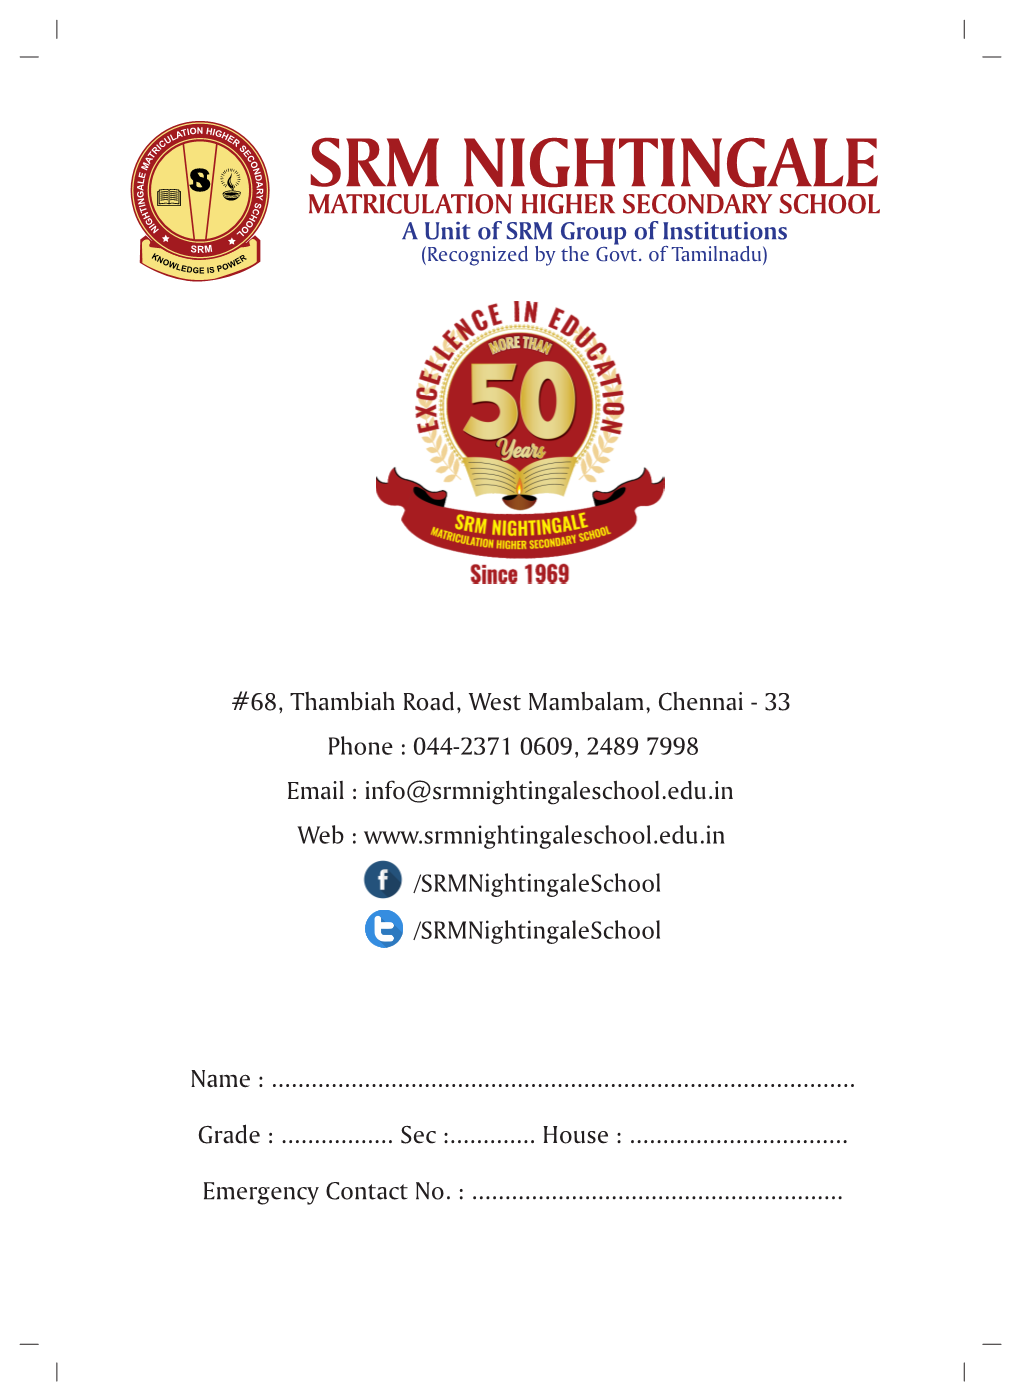 SRM NIGHTINGALE MATRICULATION HIGHER SECONDARY SCHOOL a Unit of SRM Group of Institutions (Recognized by the Govt